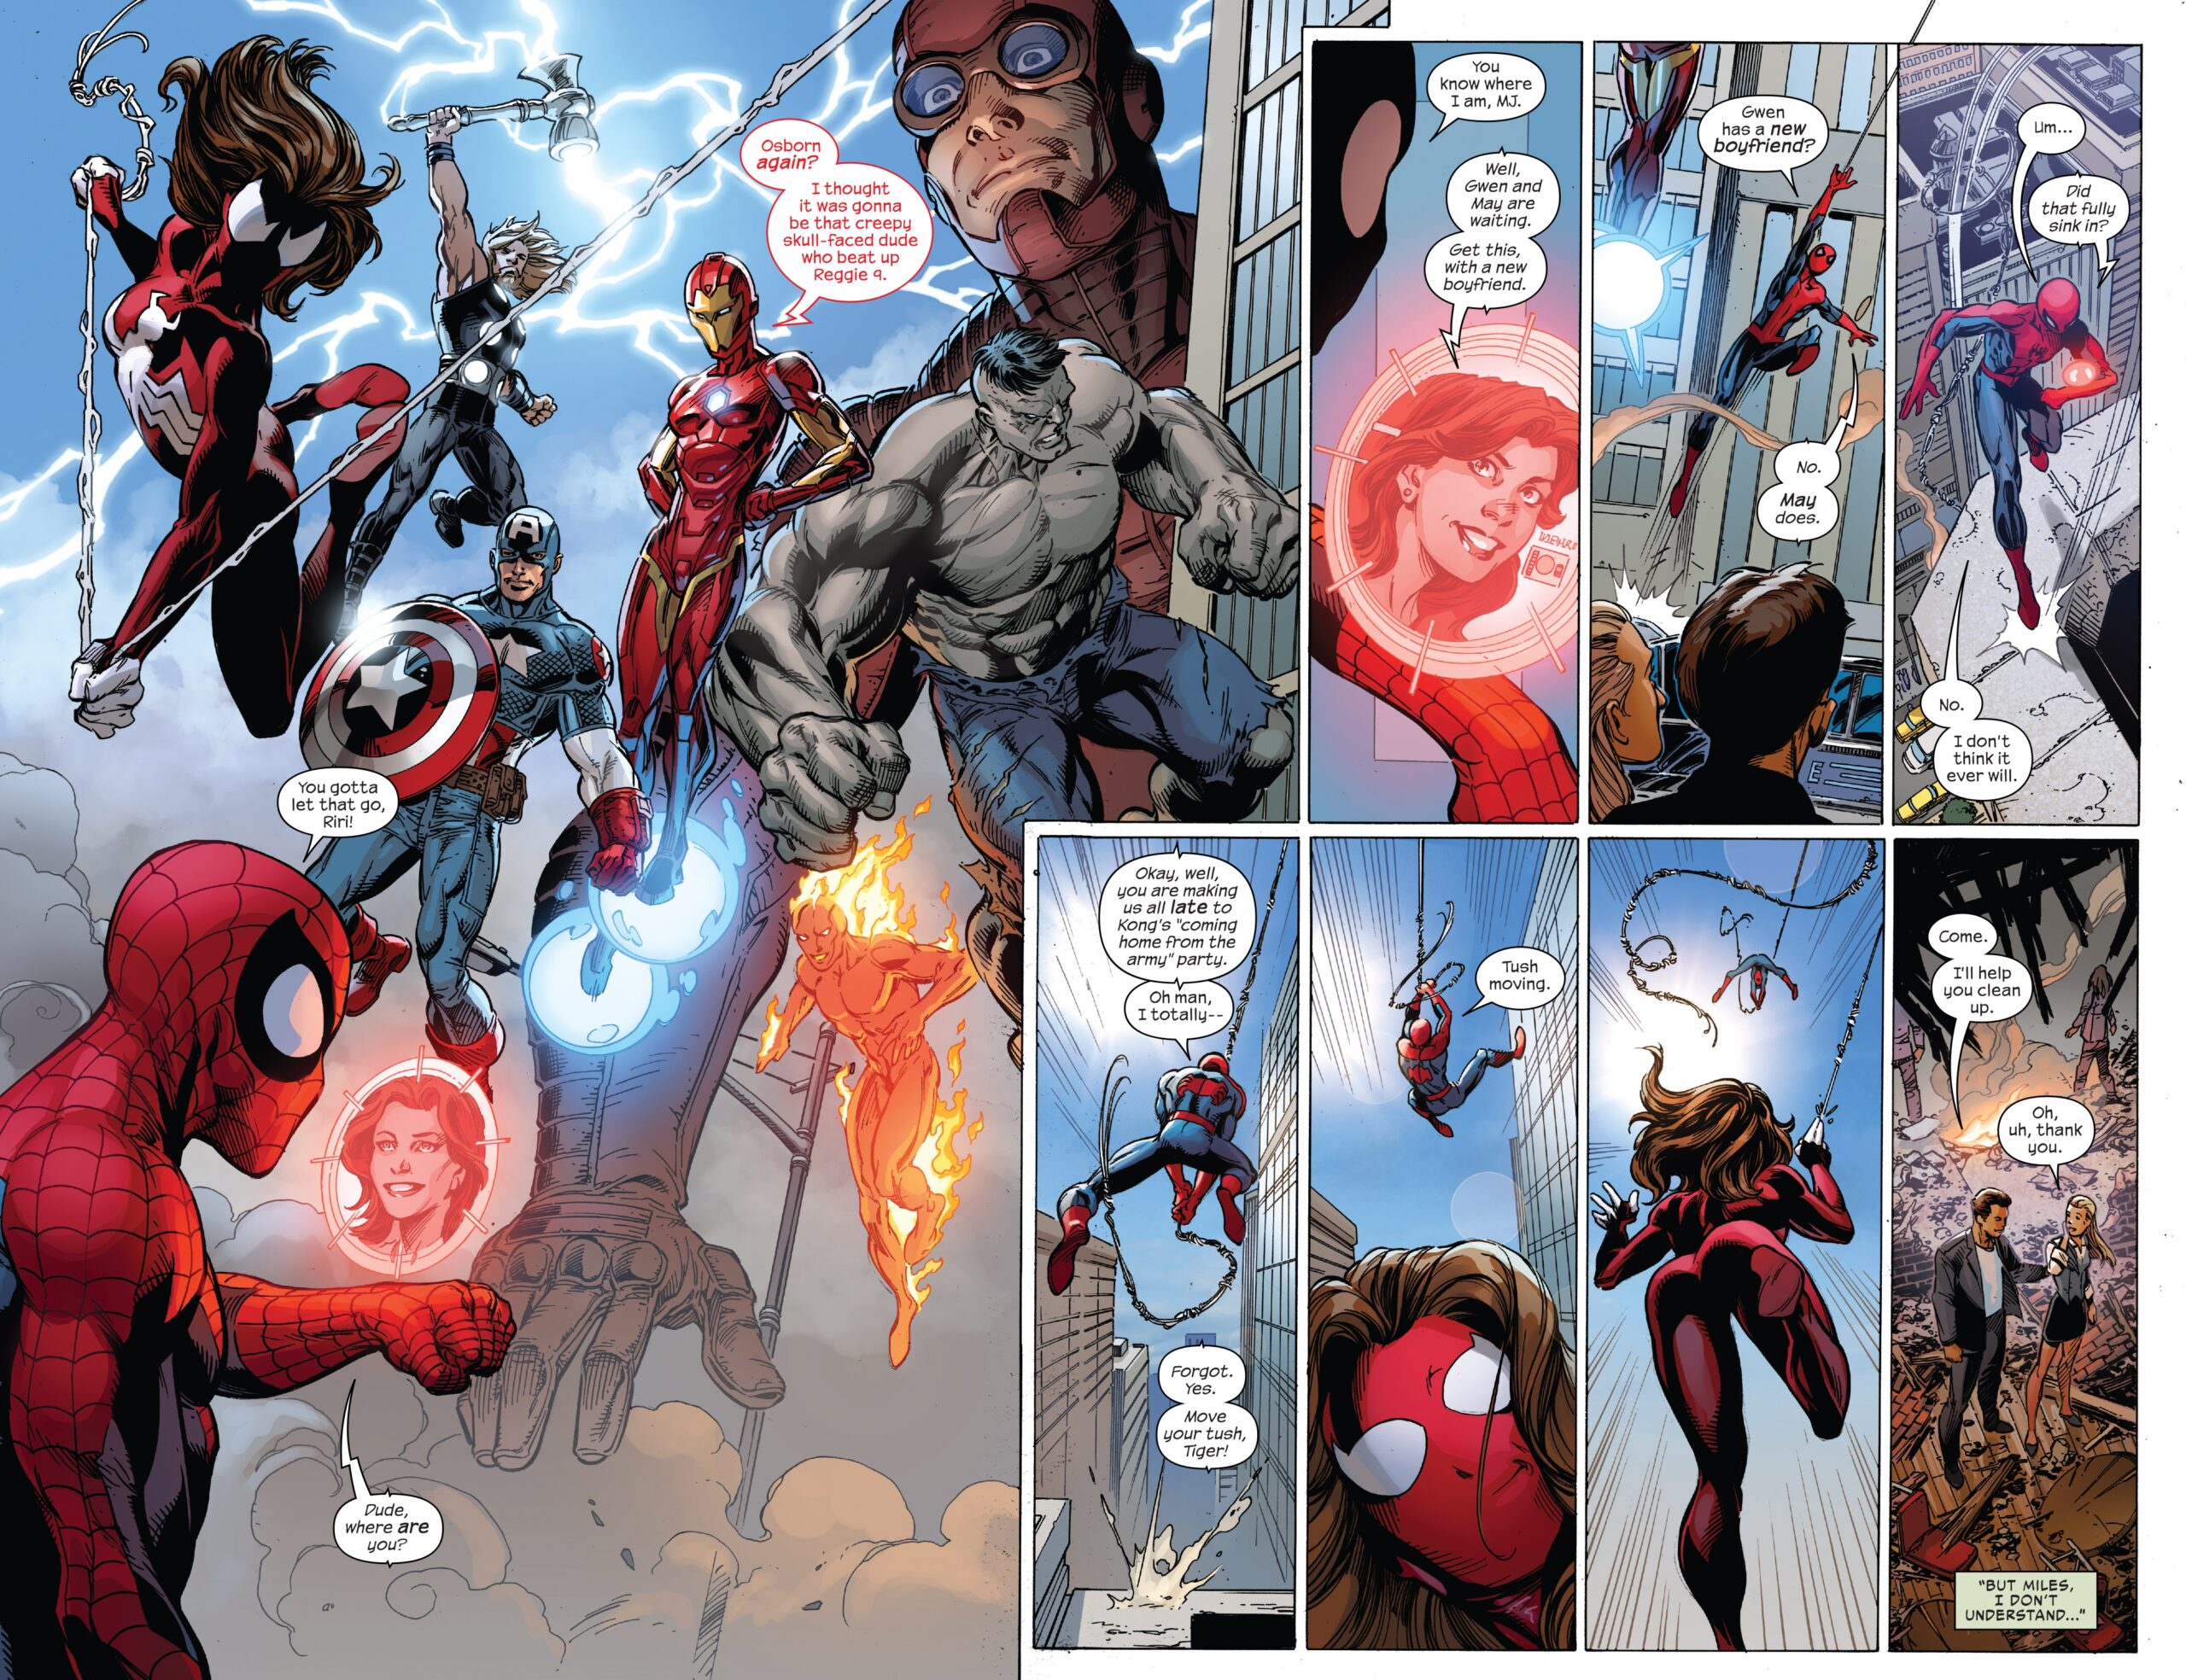 Peter Parker is alive and well in the 1610 in Spider-Men II Vol. 1 #5 ((2017), Marvel Comics. Words by Brian Michael Bendis, art by Sara Pichelli, Mark Bagley, Elisabetta D'Amico, John Dell, Justin Ponsor, and Cory Petit.